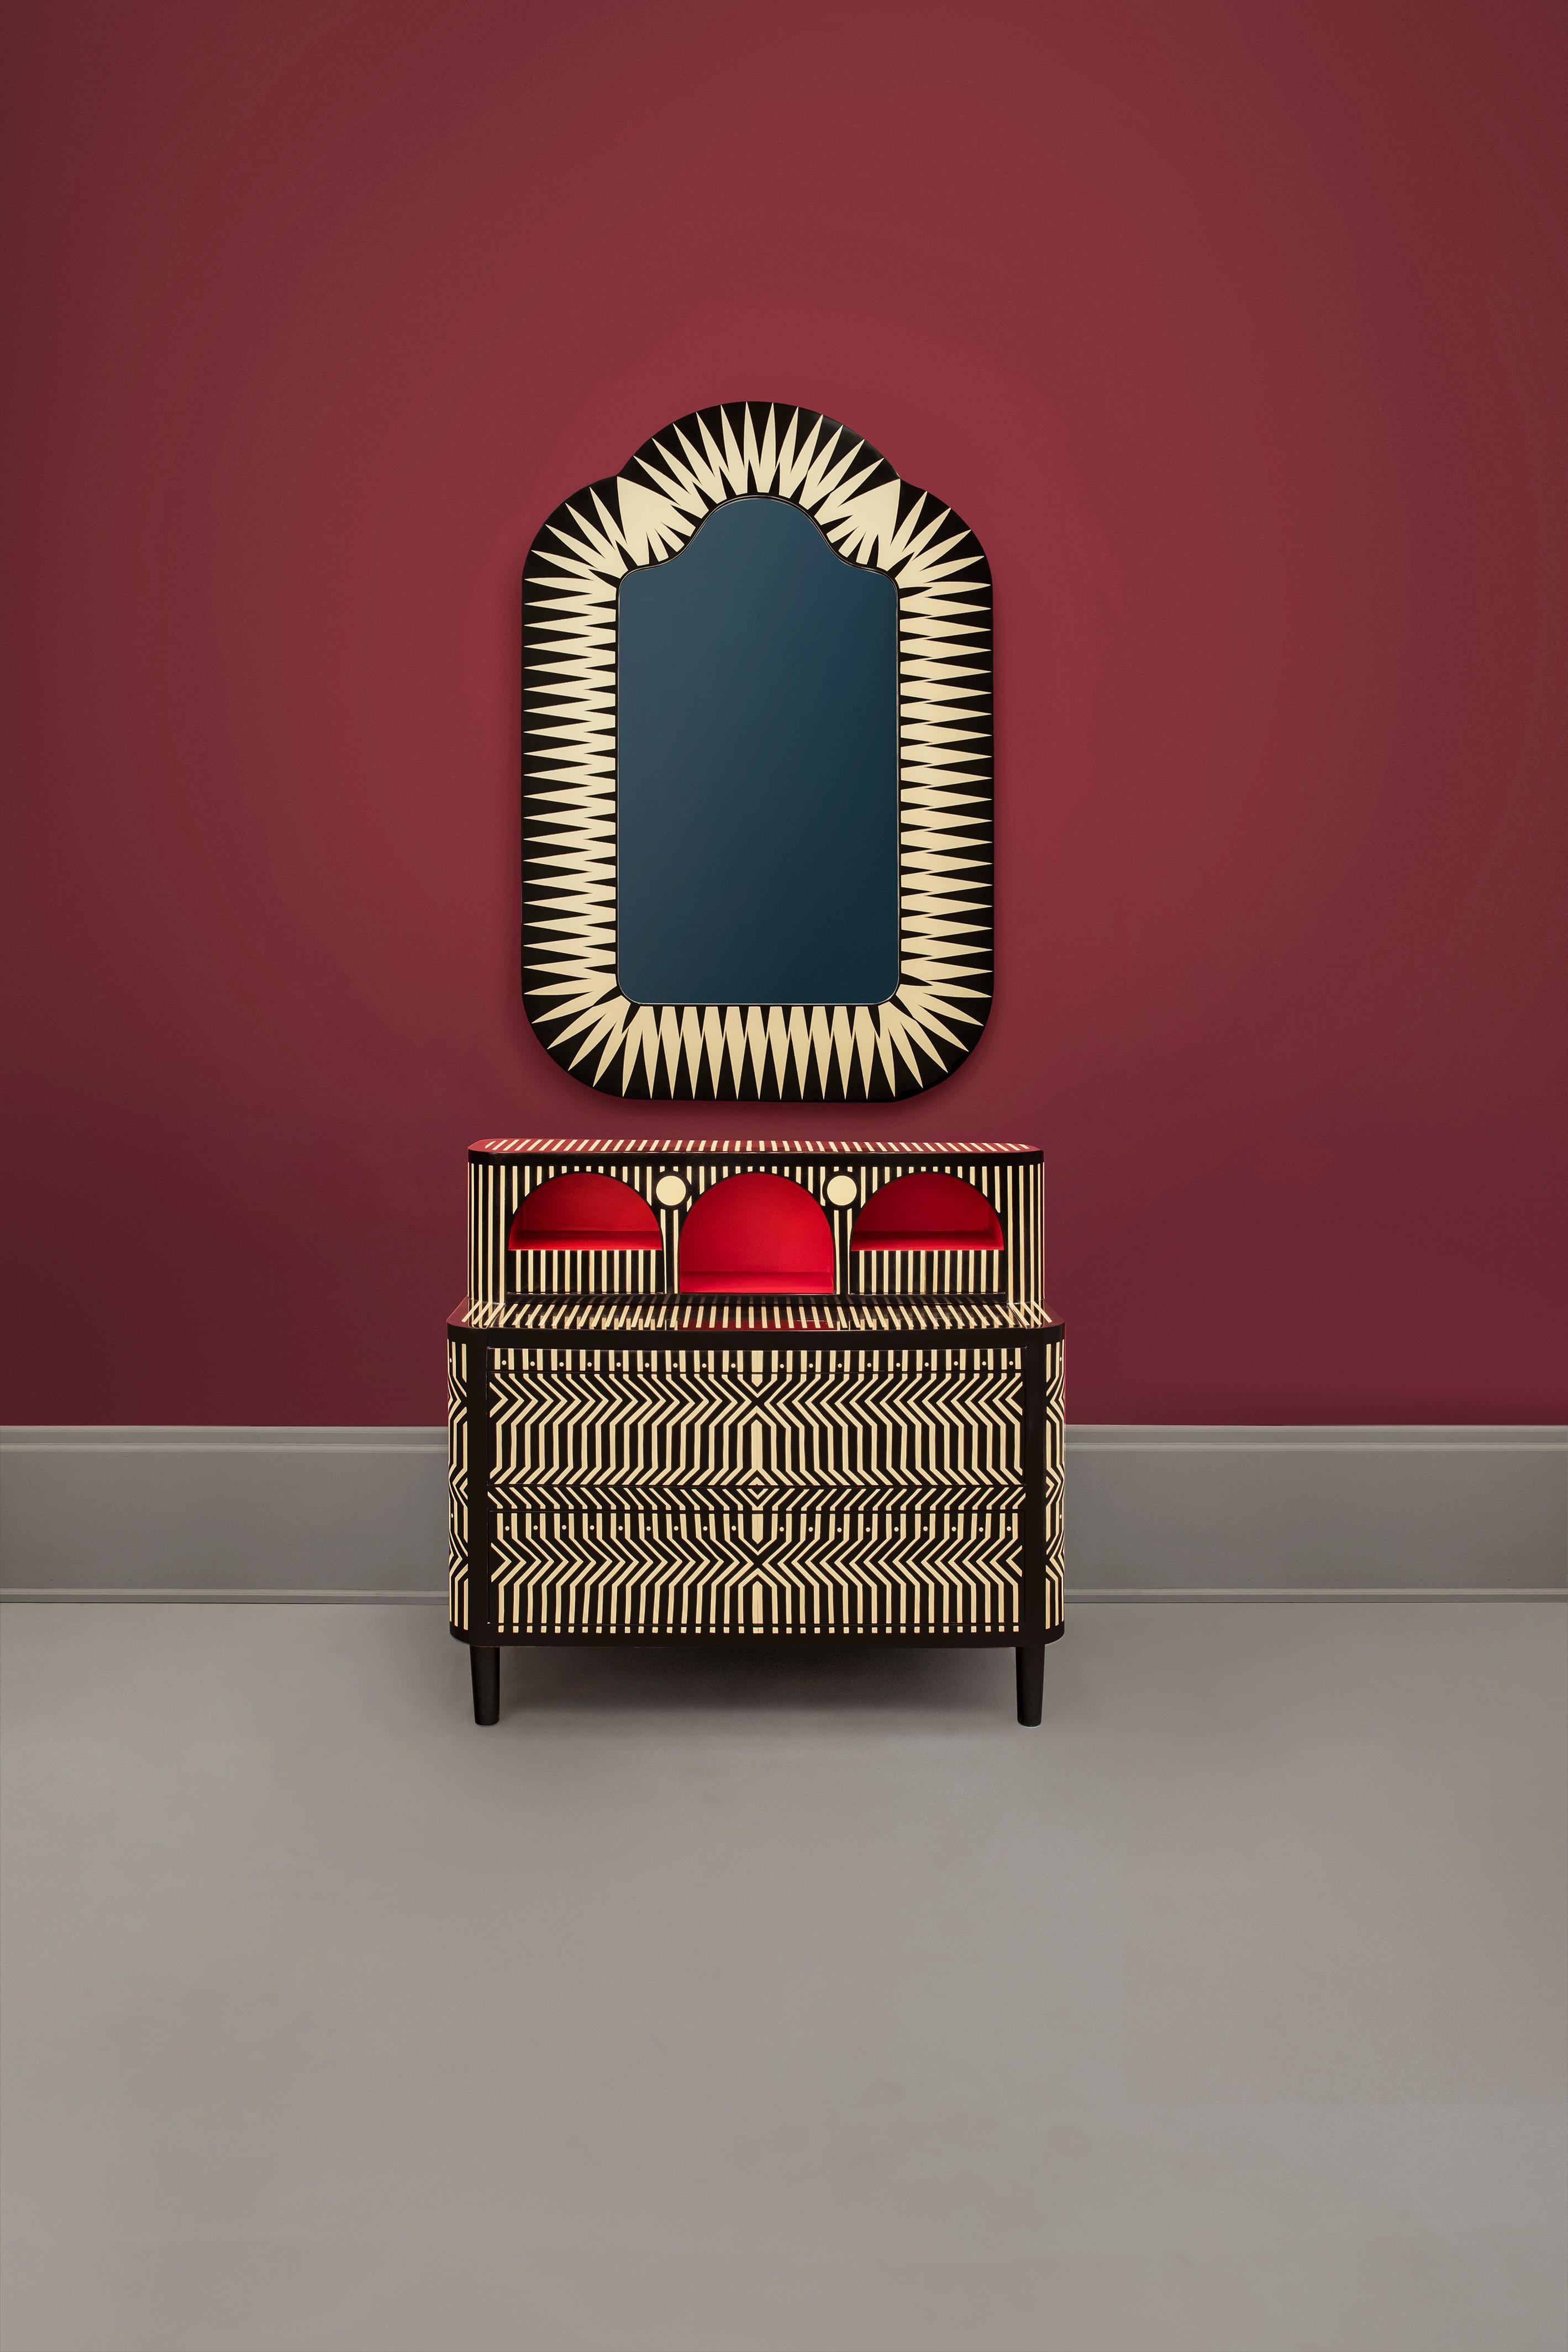 The Big Parade Tall Floor Mirror by Matteo Cibic is a large fun shaped mirror. It stands tall in any interior space.

India's handicrafts are as multifarious as its cultures, and as rich as its history. The art of bone and horn inlay is omnipresent